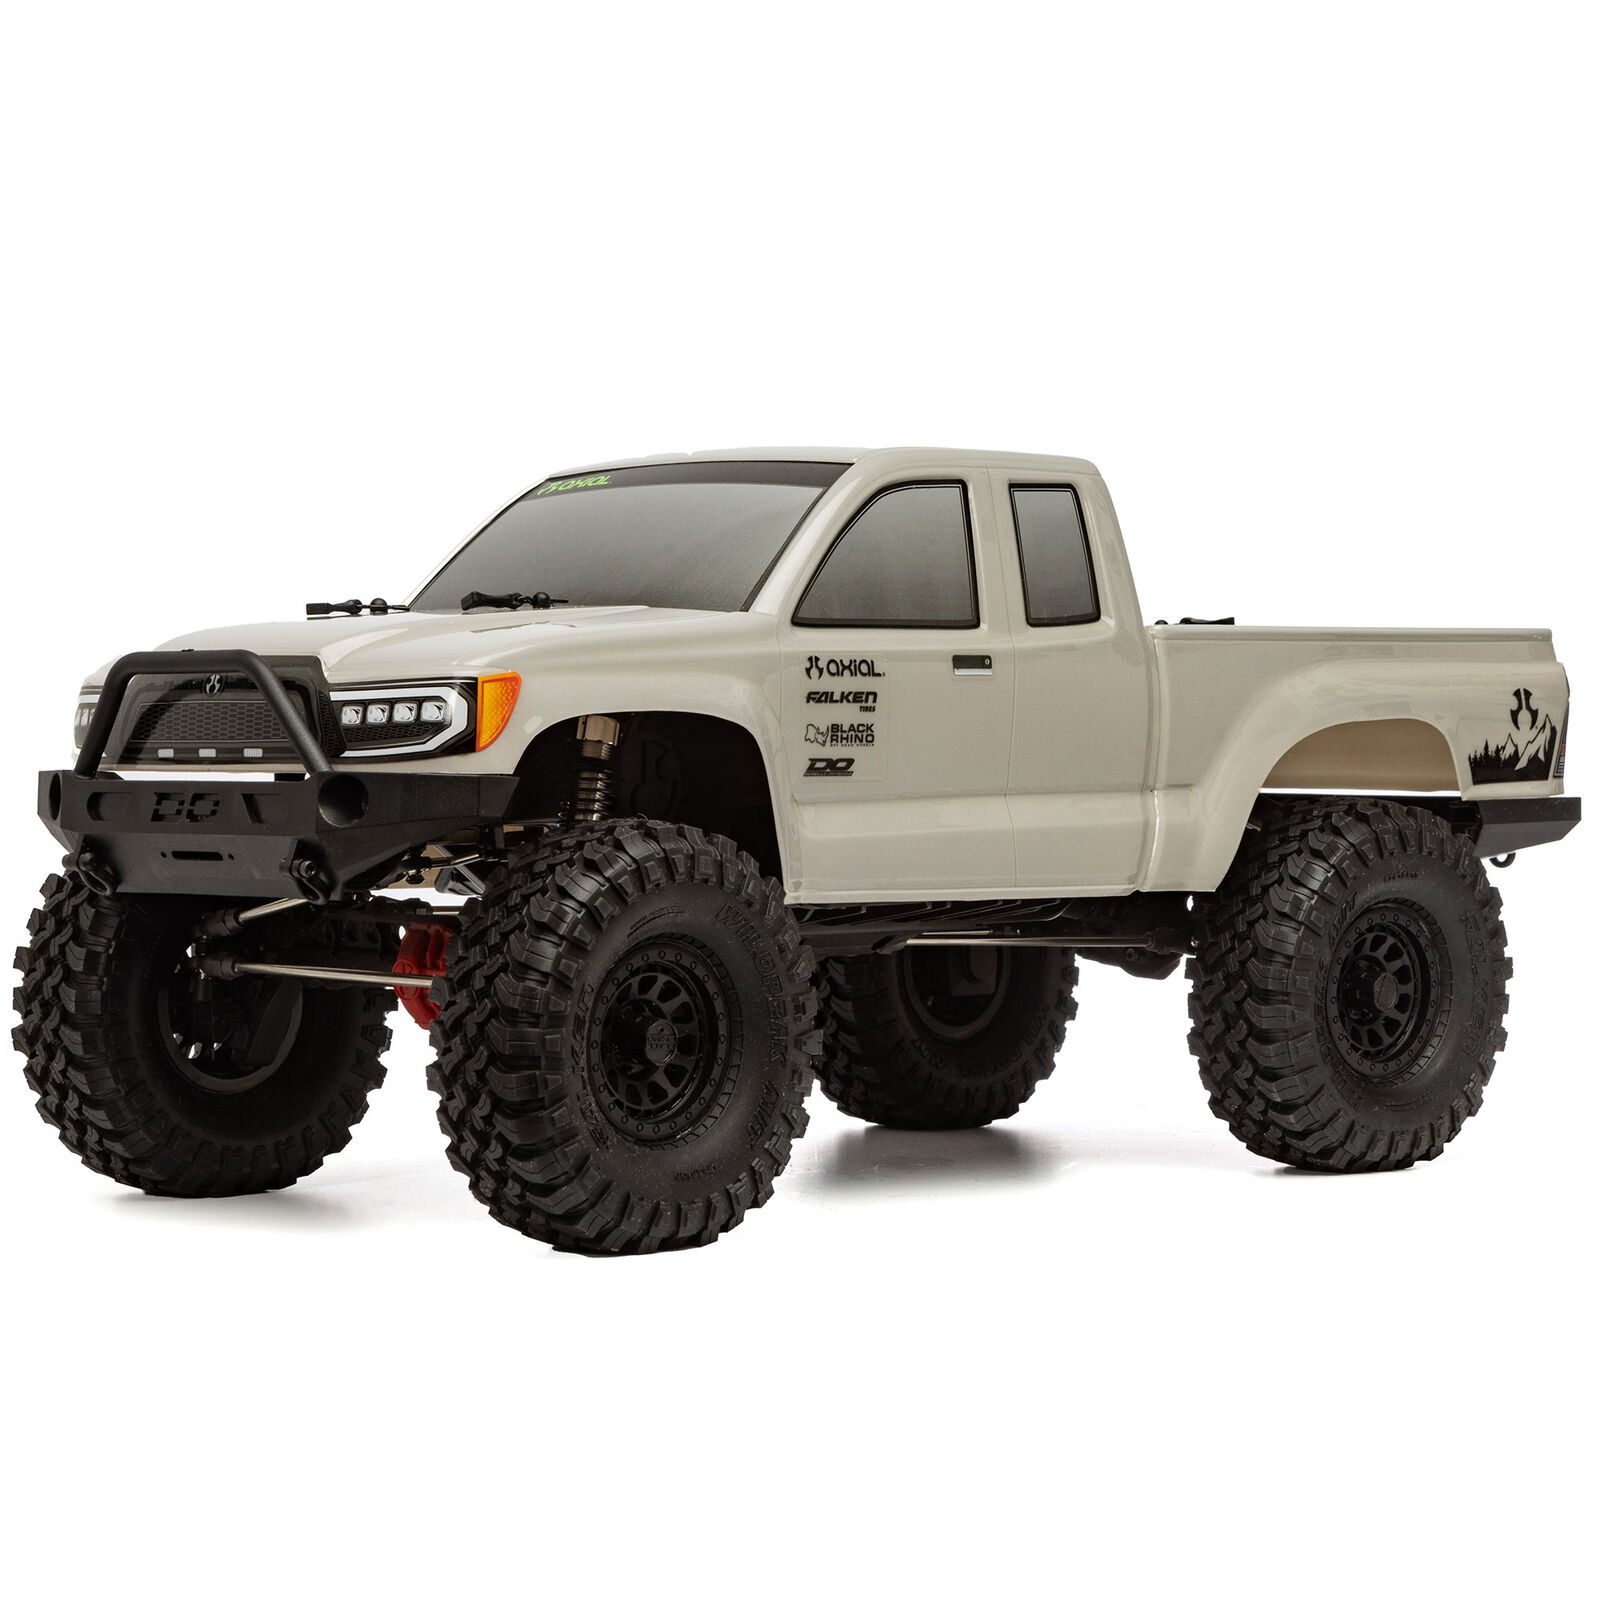 Axial AXI03027T3 - 1/10 SCX10 III Base Camp 4WD Rock Crawler Brushed RTR, Gray